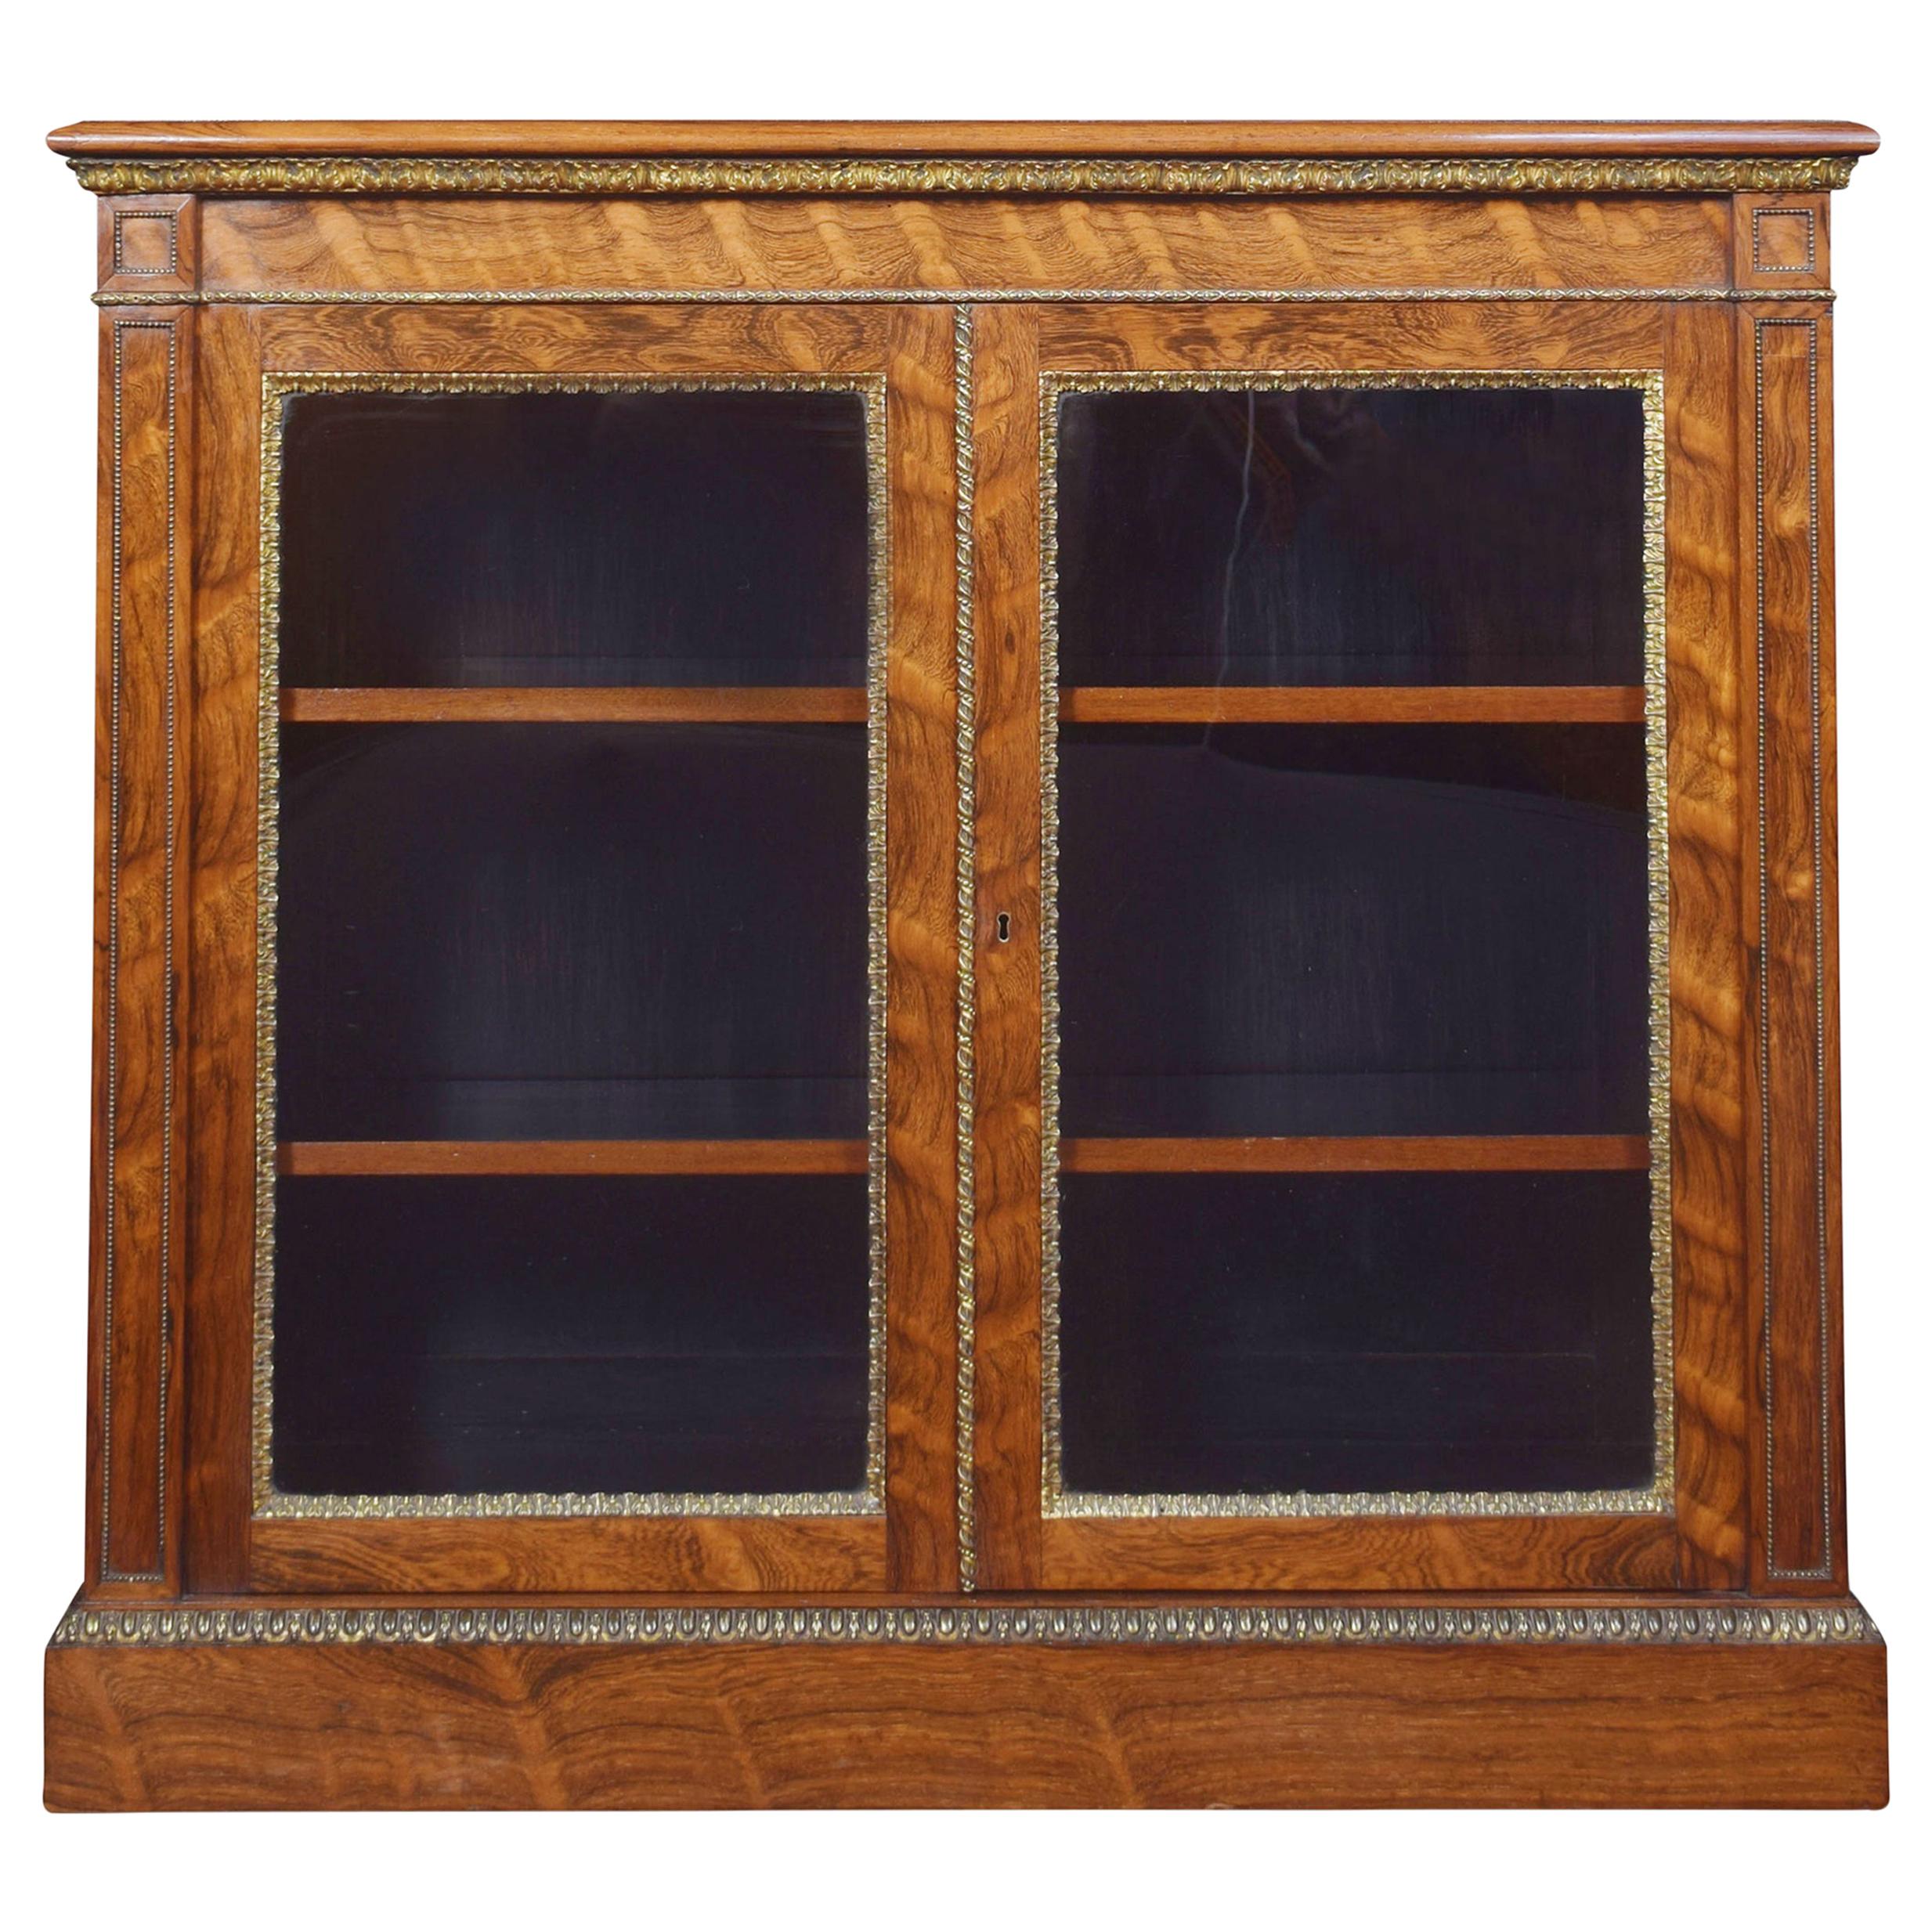 Two-Door Bookcase by Holland and Sons